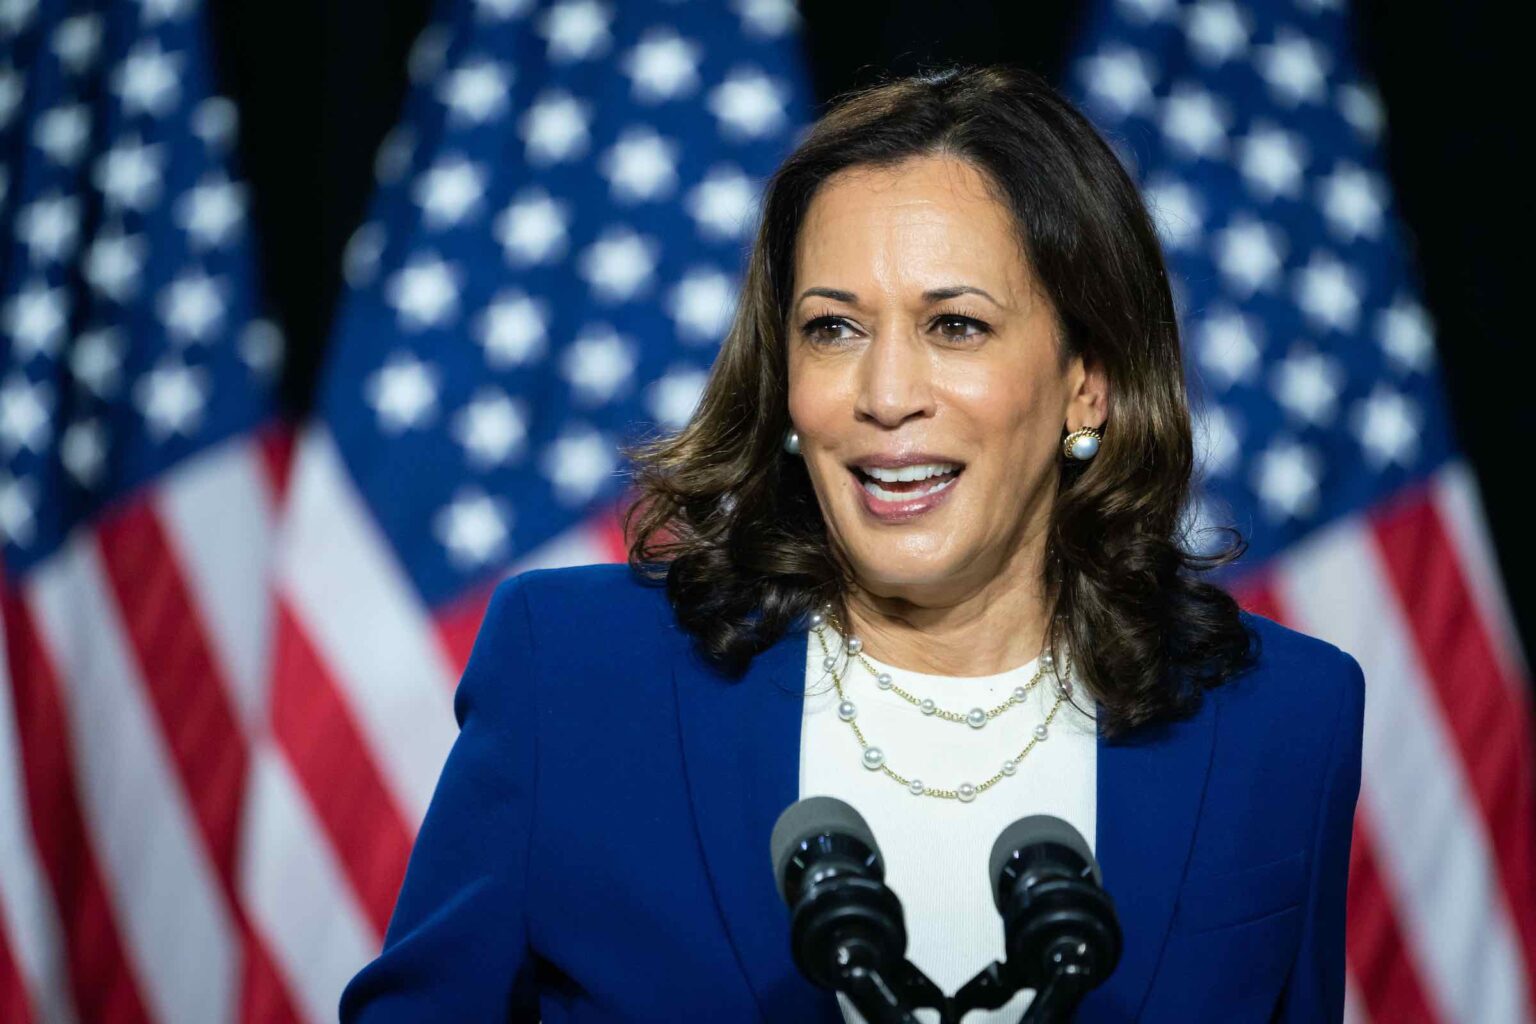 Kamala Harris is set to become the frist woman to fill the role of vice president. What kinds of policies might she advocate for?